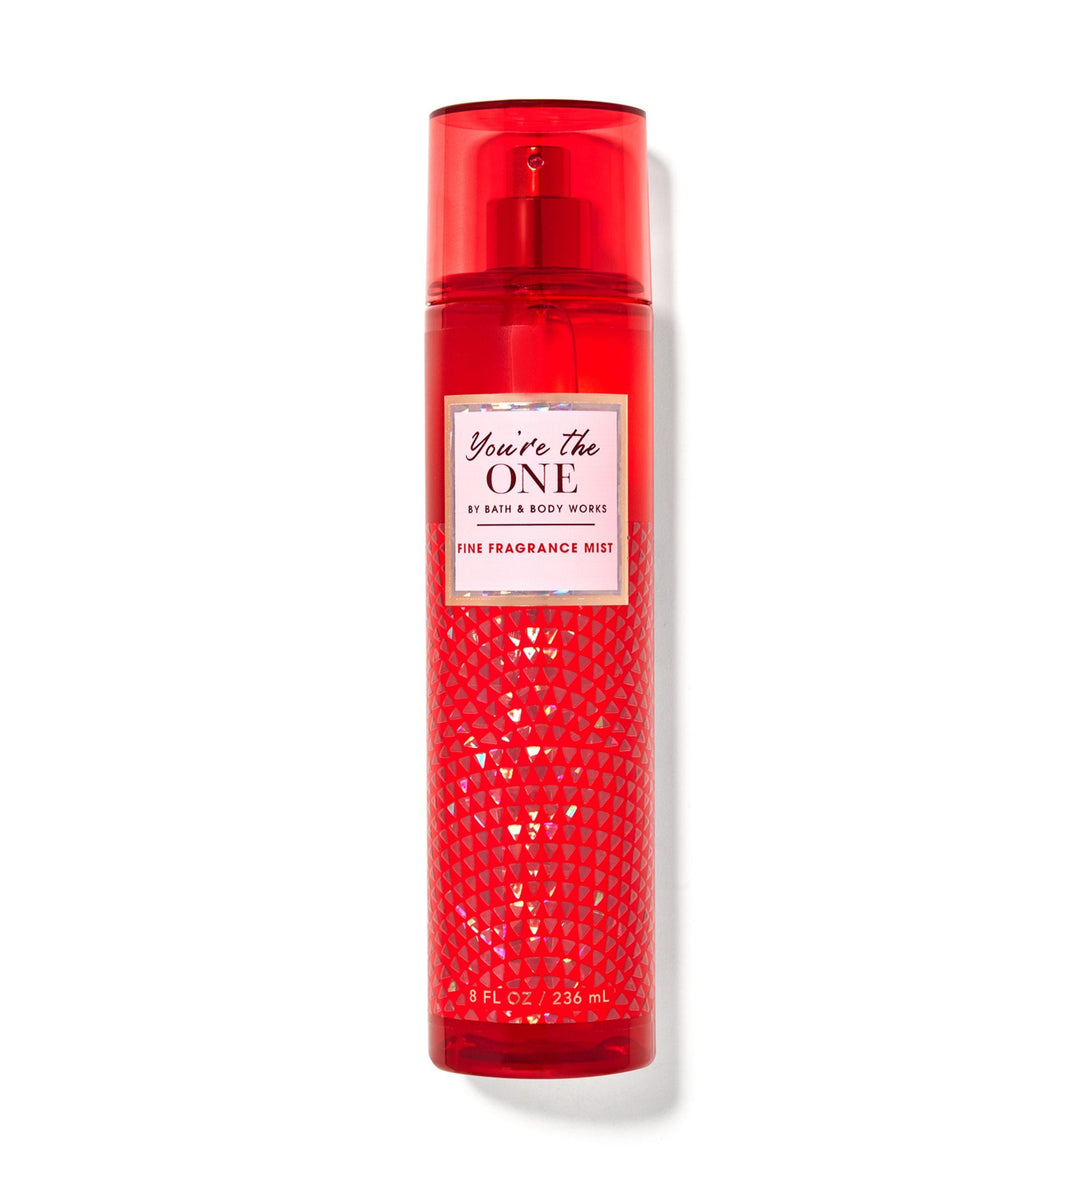 You 're The One Fragrance Mist - 236ml